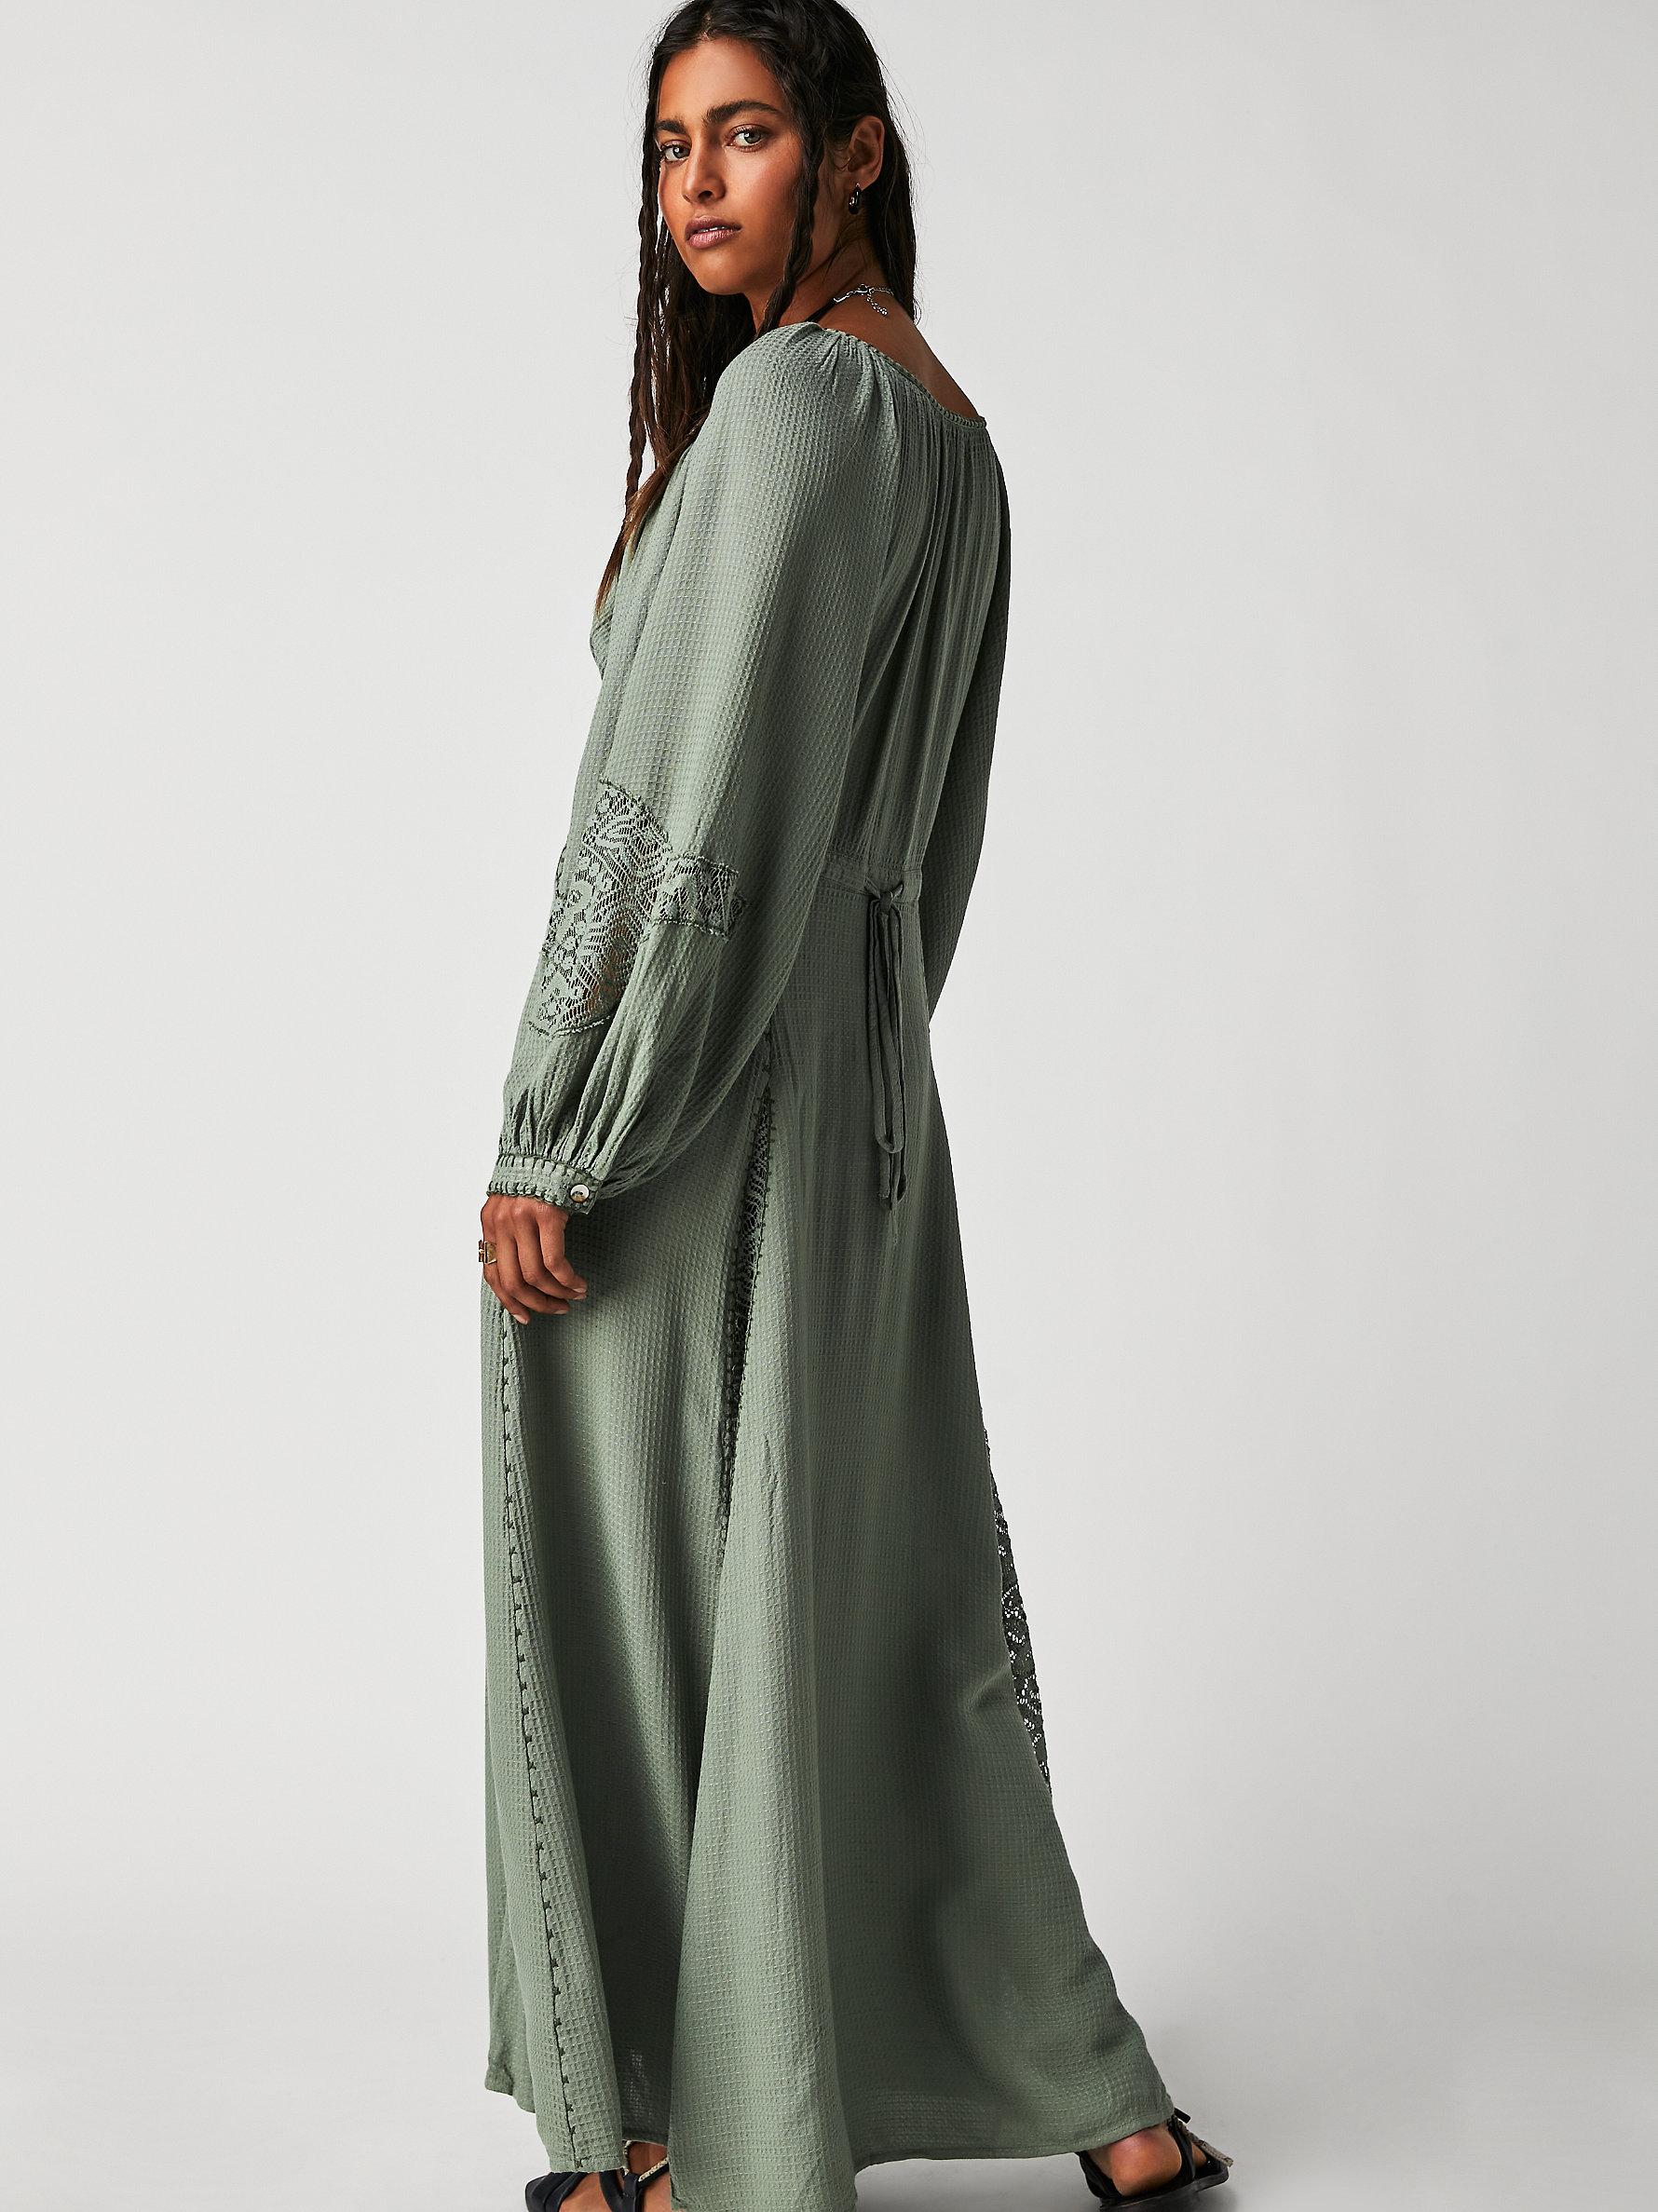 Free People Southwest Lace Maxi Dress in Green | Lyst